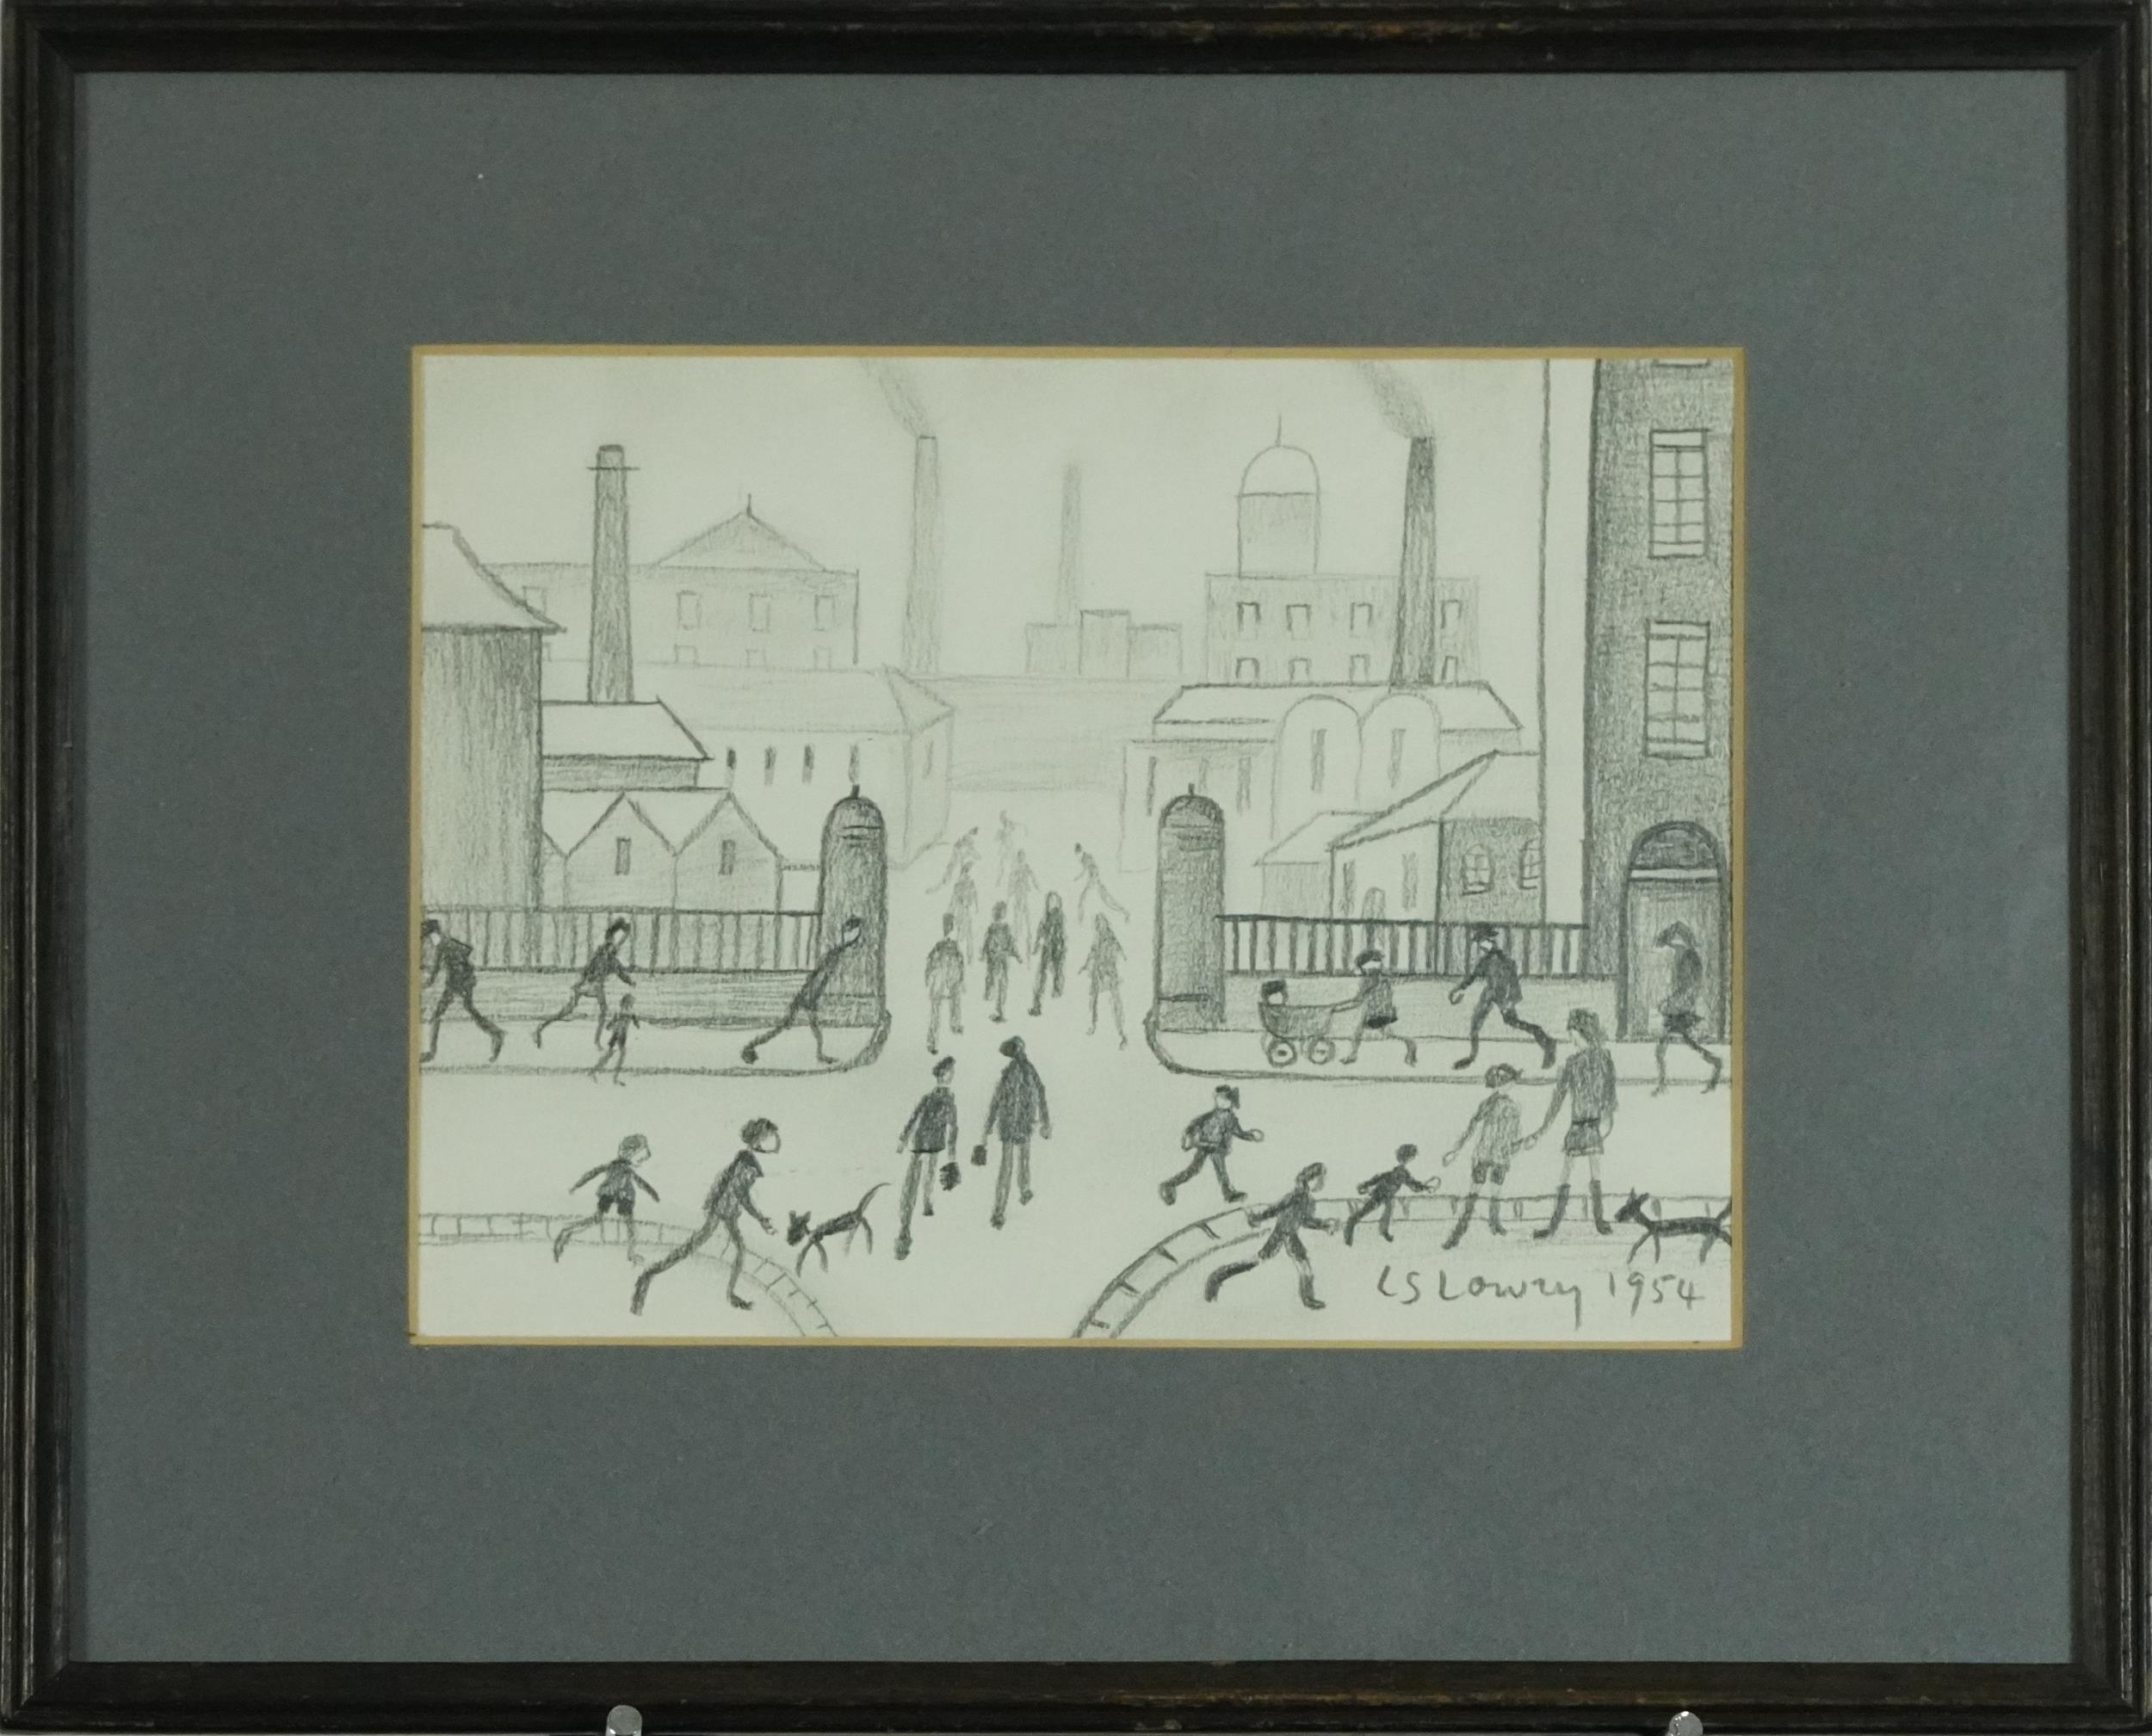 Manner of Laurence Stephen Lowry - Industrial street scene with figures walking about, pencil sketch - Image 2 of 3